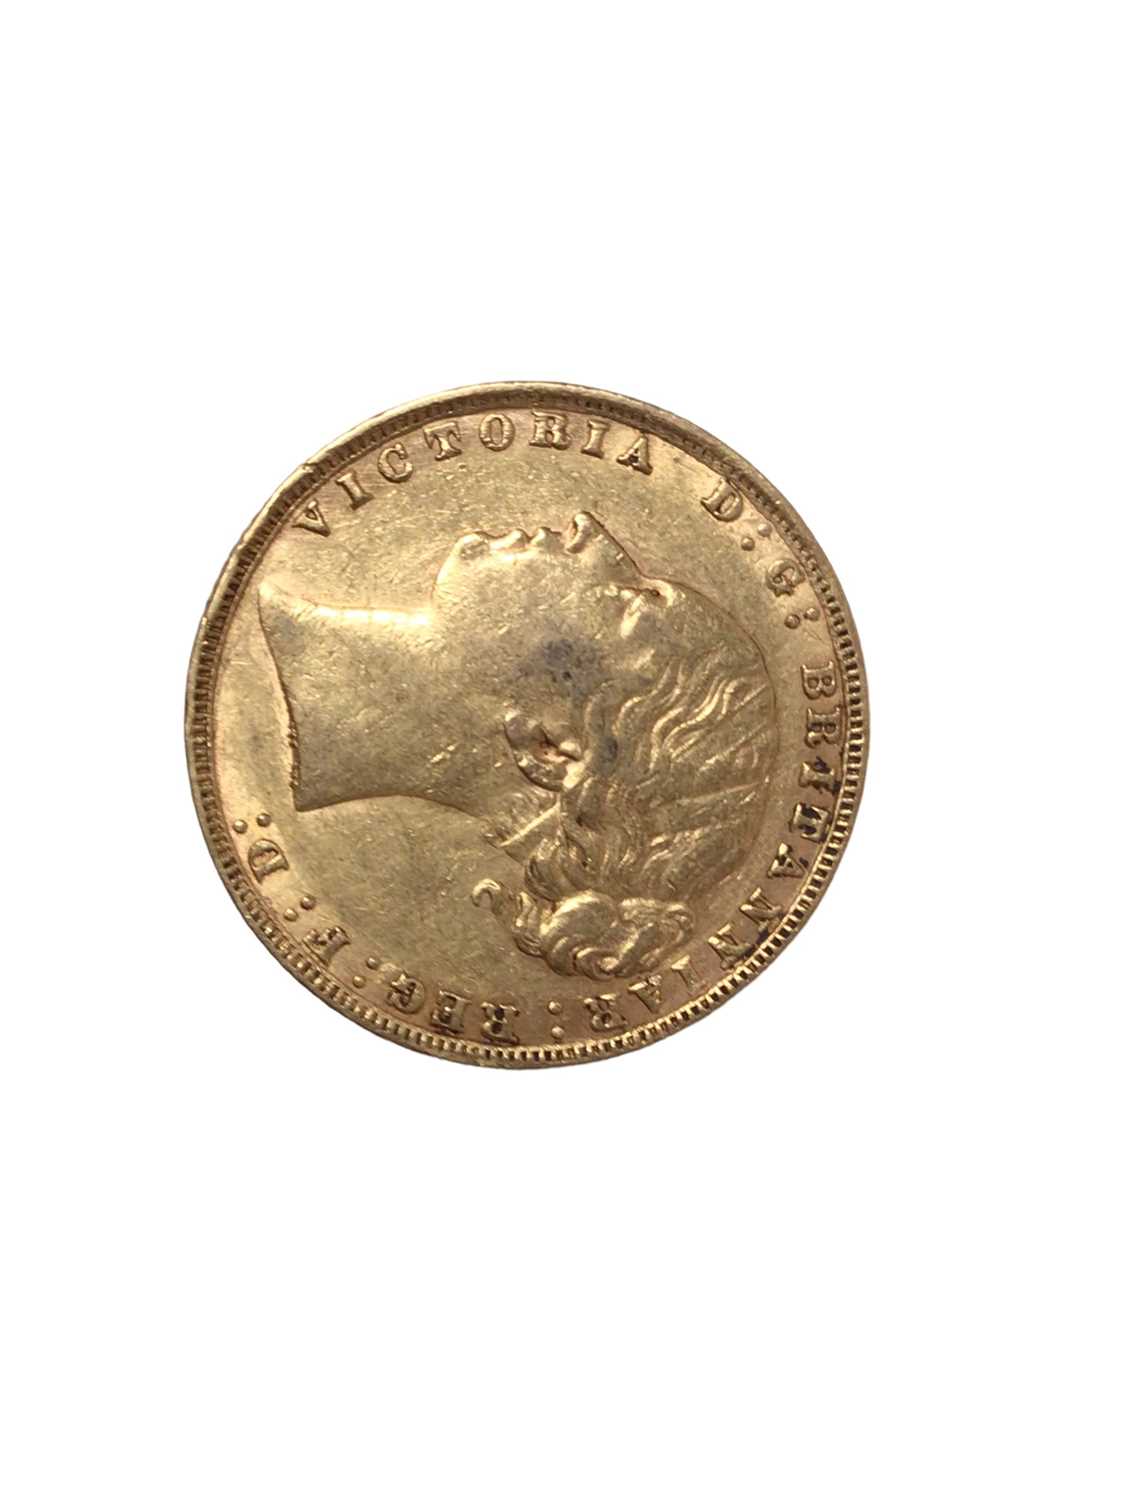 Lot 412 - G.B. - Gold Sovereign Victoria YH 1876 Rev: George & Dragon VF (1 coin)